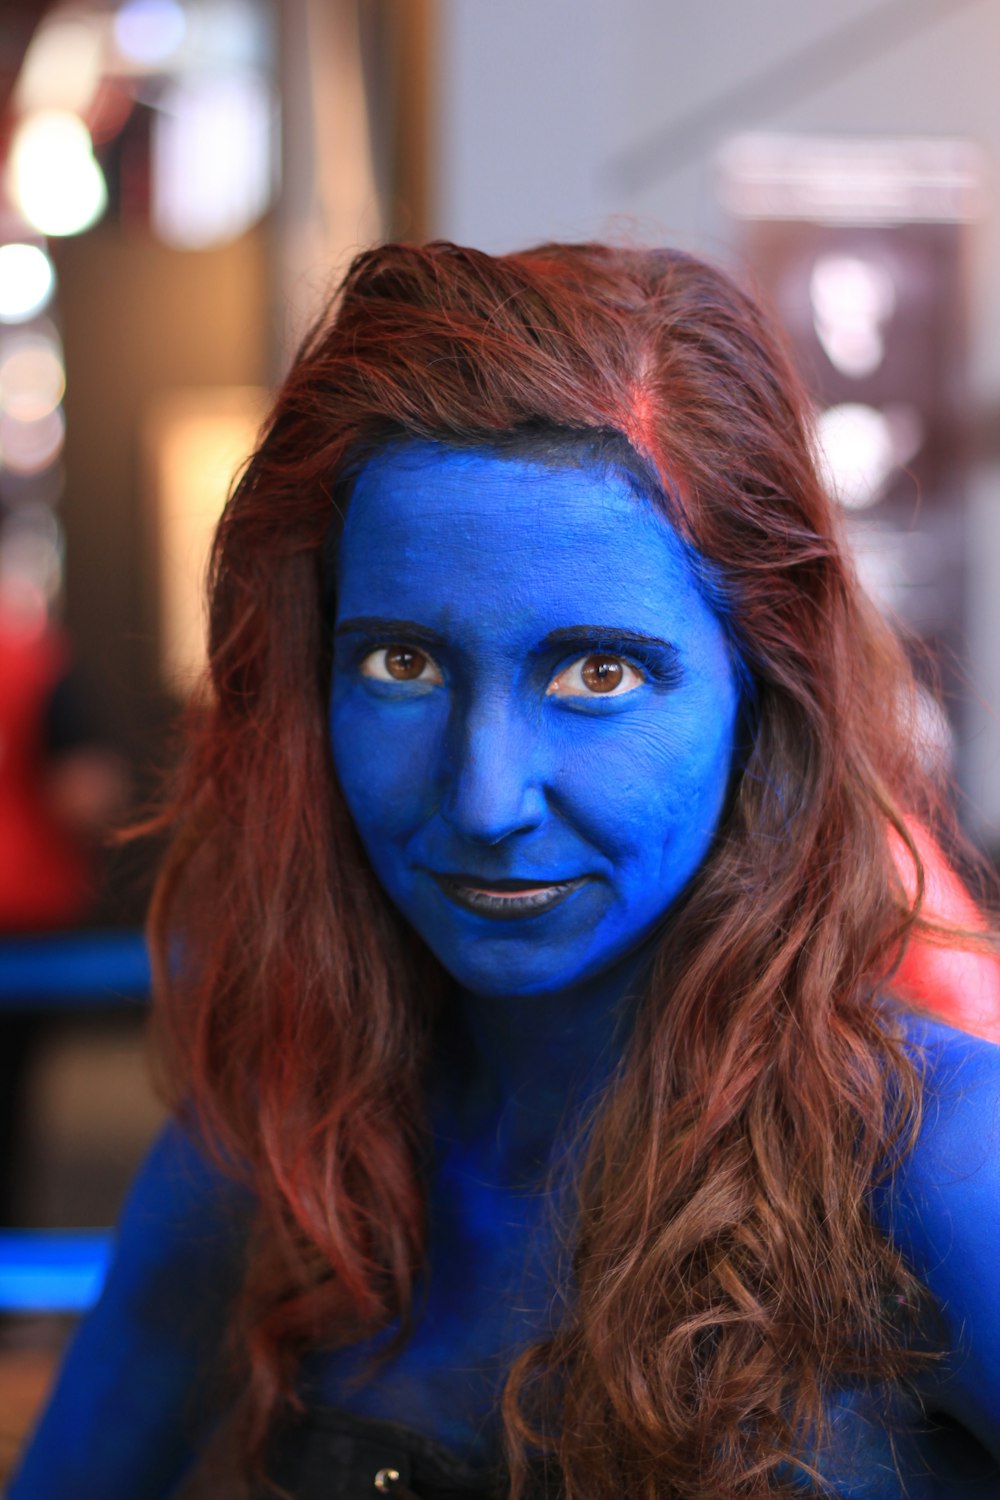 Woman with blue bodypaint in selective focus photography photo – Free  Portrait Image on Unsplash